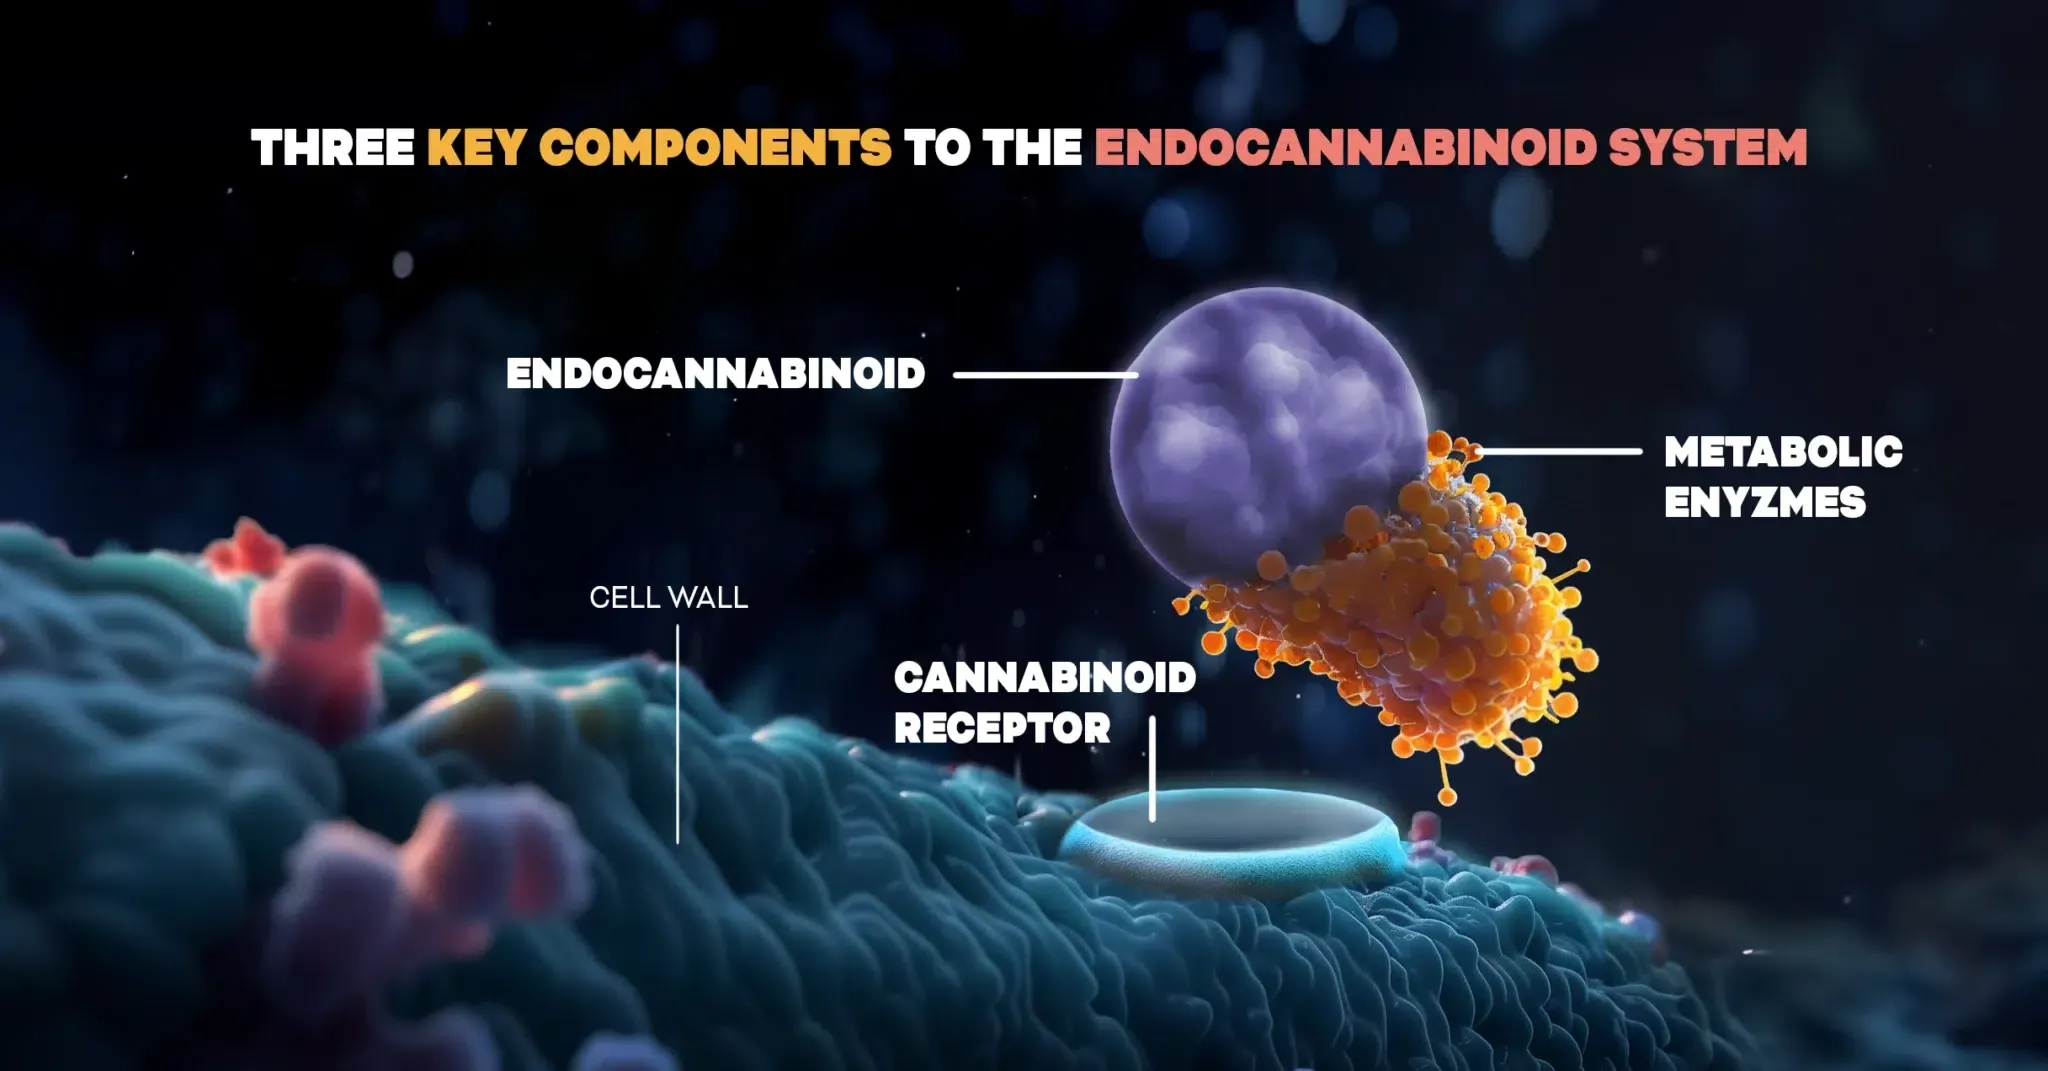 This scientific illustration visually highlights the essential parts of the ECS, with the title 'Three Key Components of the Endocannabinoid System.' Set against a microscopic cellular backdrop, it identifies an 'ENDOCANNABINOID,' illustrated as a purple sphere; a 'CANNABINOID RECEPTOR,' shown as a socket on the blue cell wall; and 'METABOLIC ENZYMES,' depicted as orange and yellow clusters engaging with the endocannabinoid. All key parts are prominently displayed, indicating the importance of these three components in the functioning of the ECS. This vivid visualization removes any confusion and is great for educational purposes.